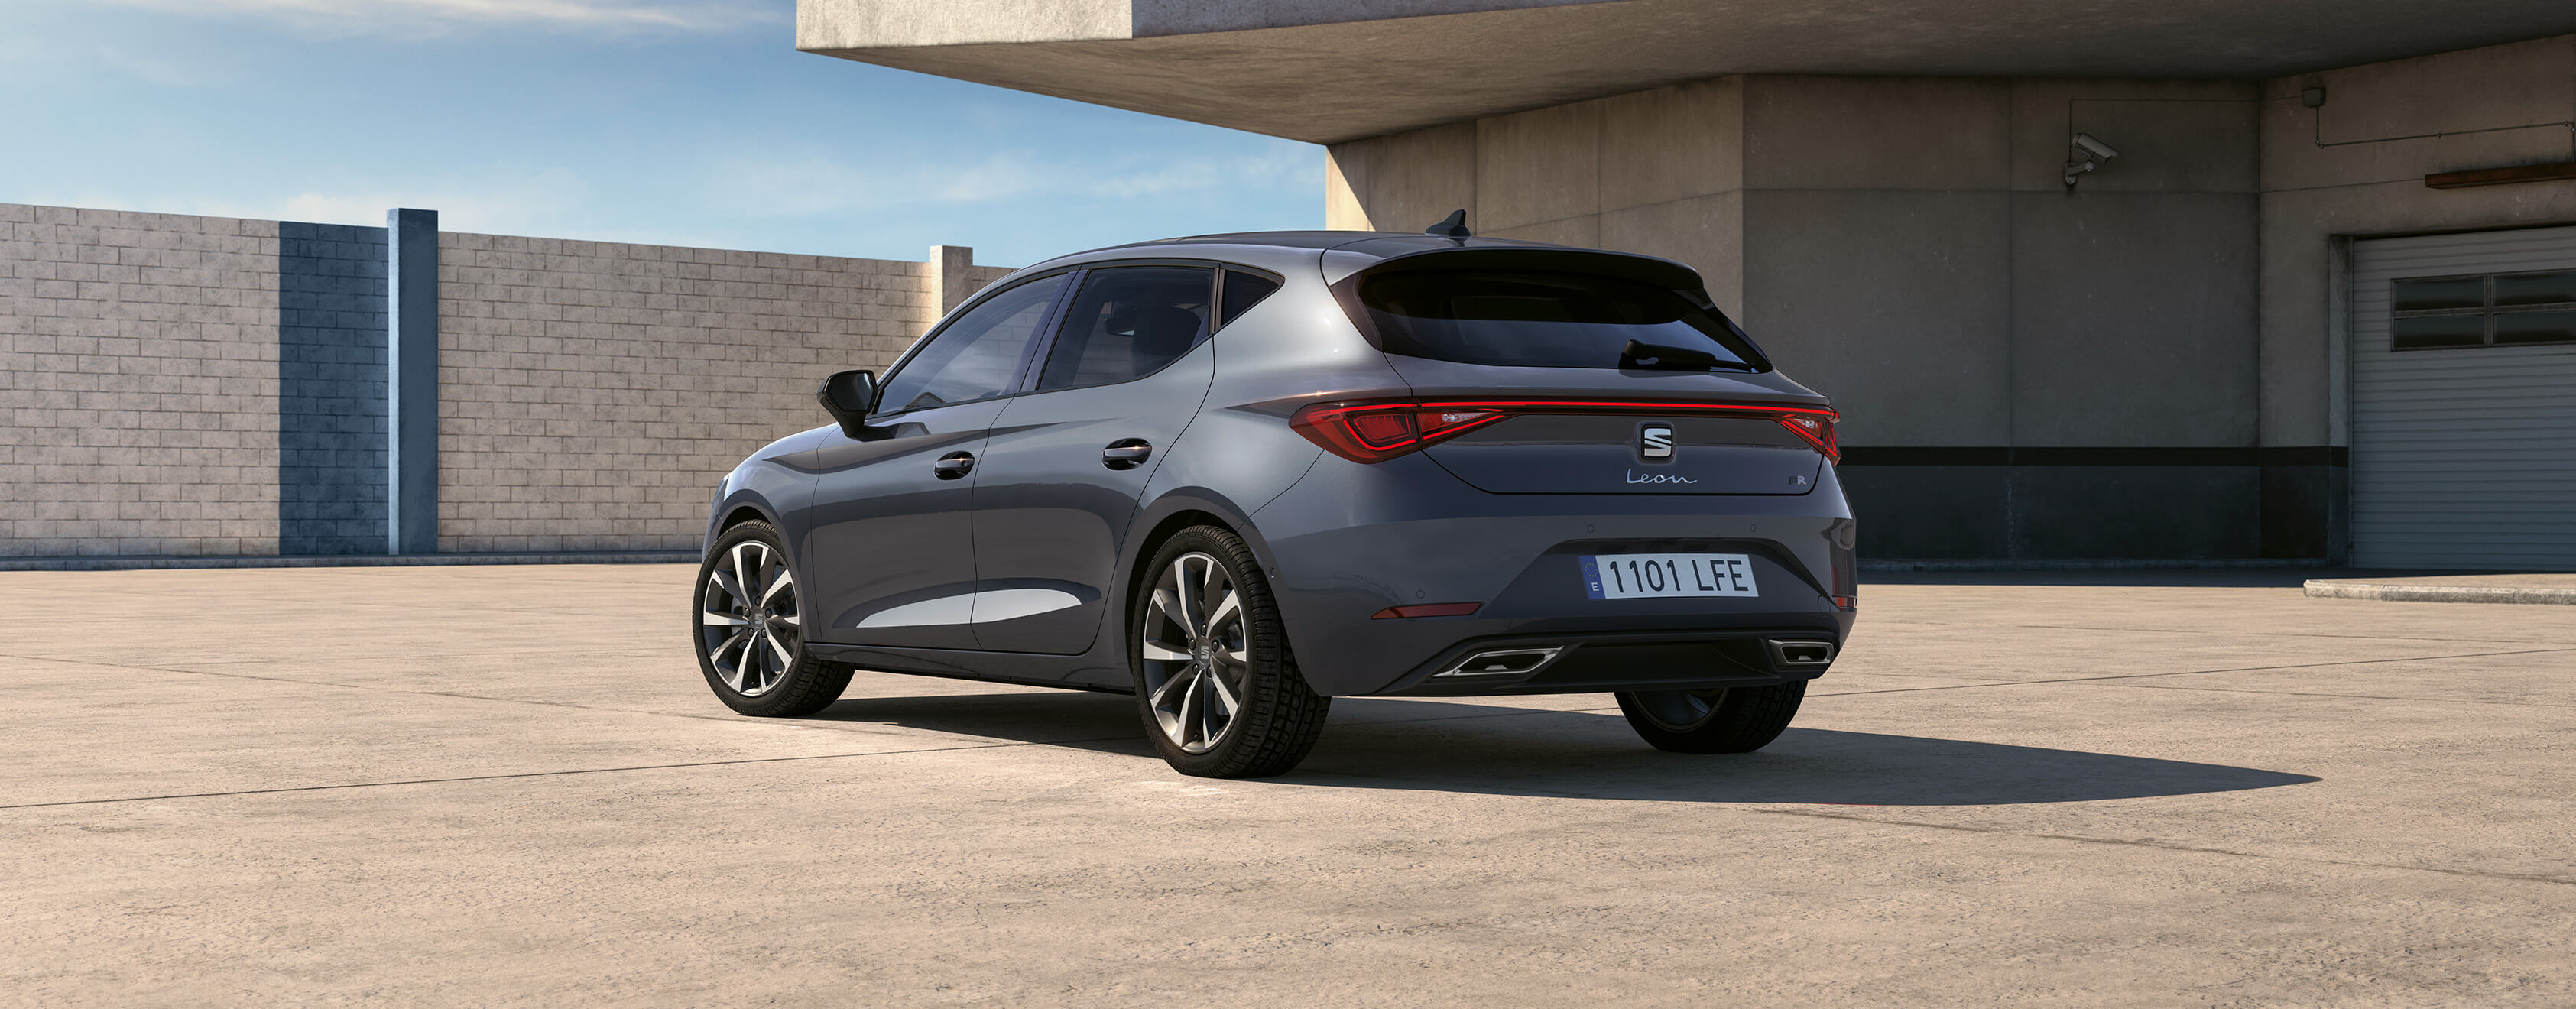 new SEAT Leon from the rear